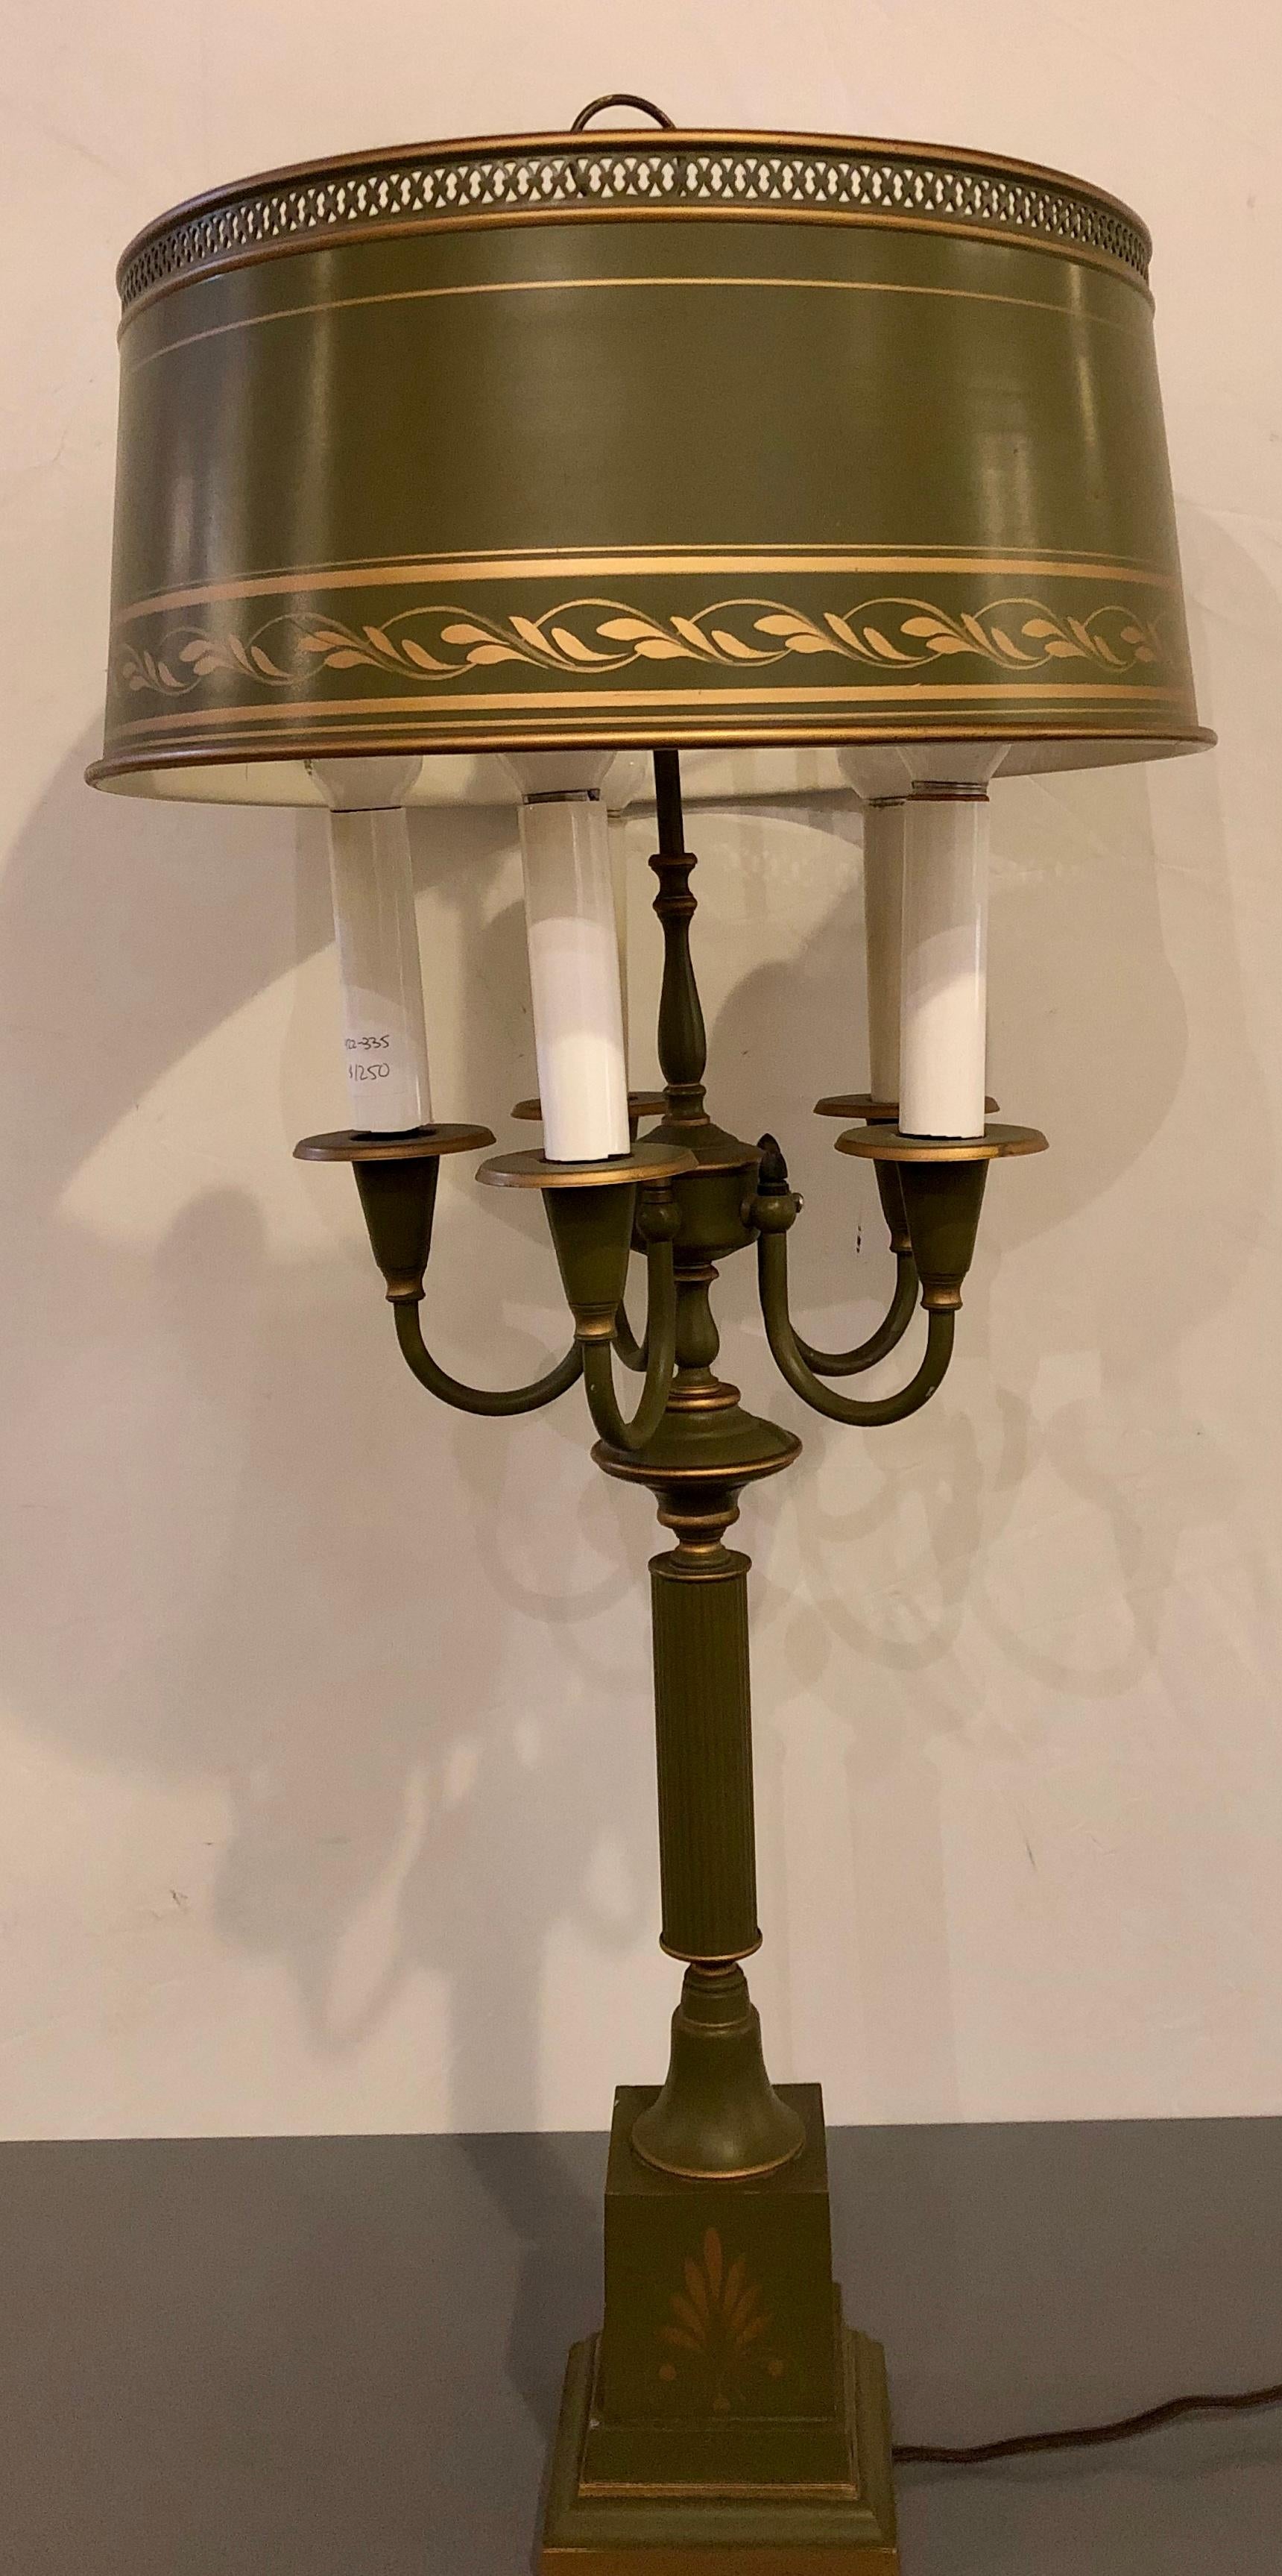 American Classical Tole Sage Green and Parcel Gilt Decorated Candelabra Lamp, Matching Tole Shade